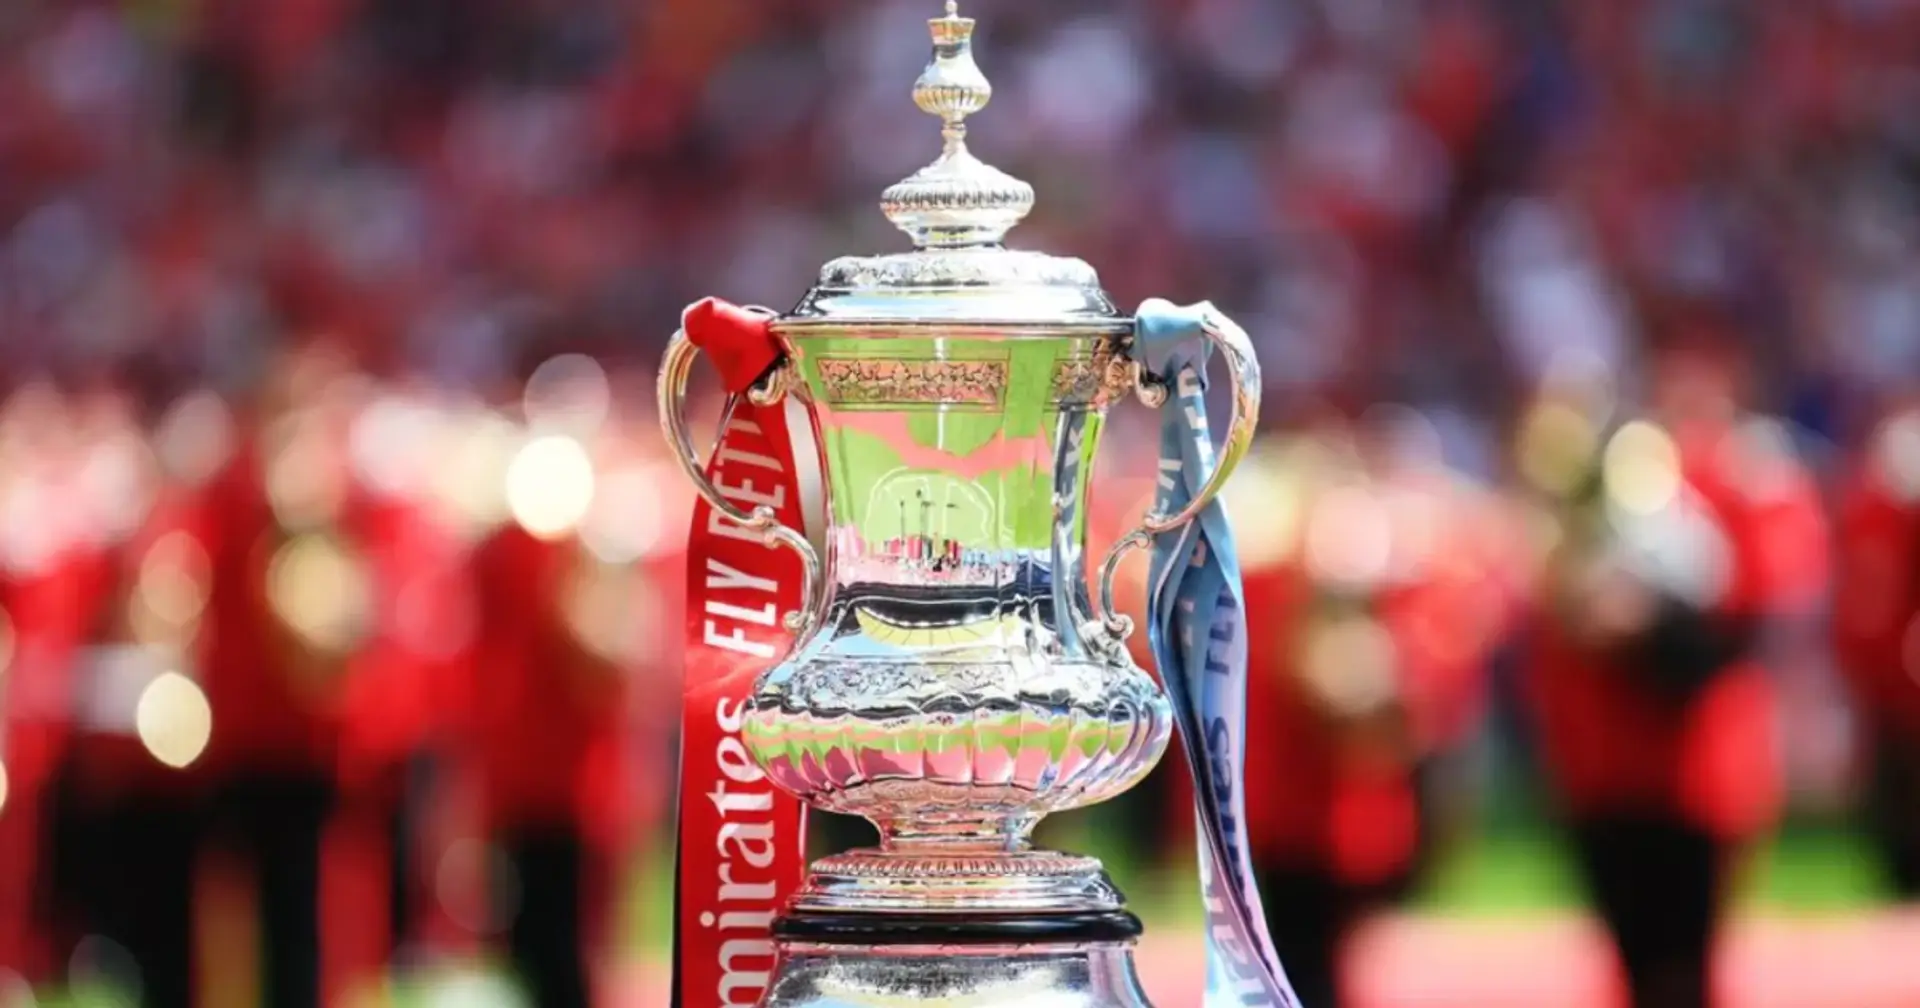 Revealed: Liverpool's potential opponents for FA Cup quarter-finals by beating Southampton